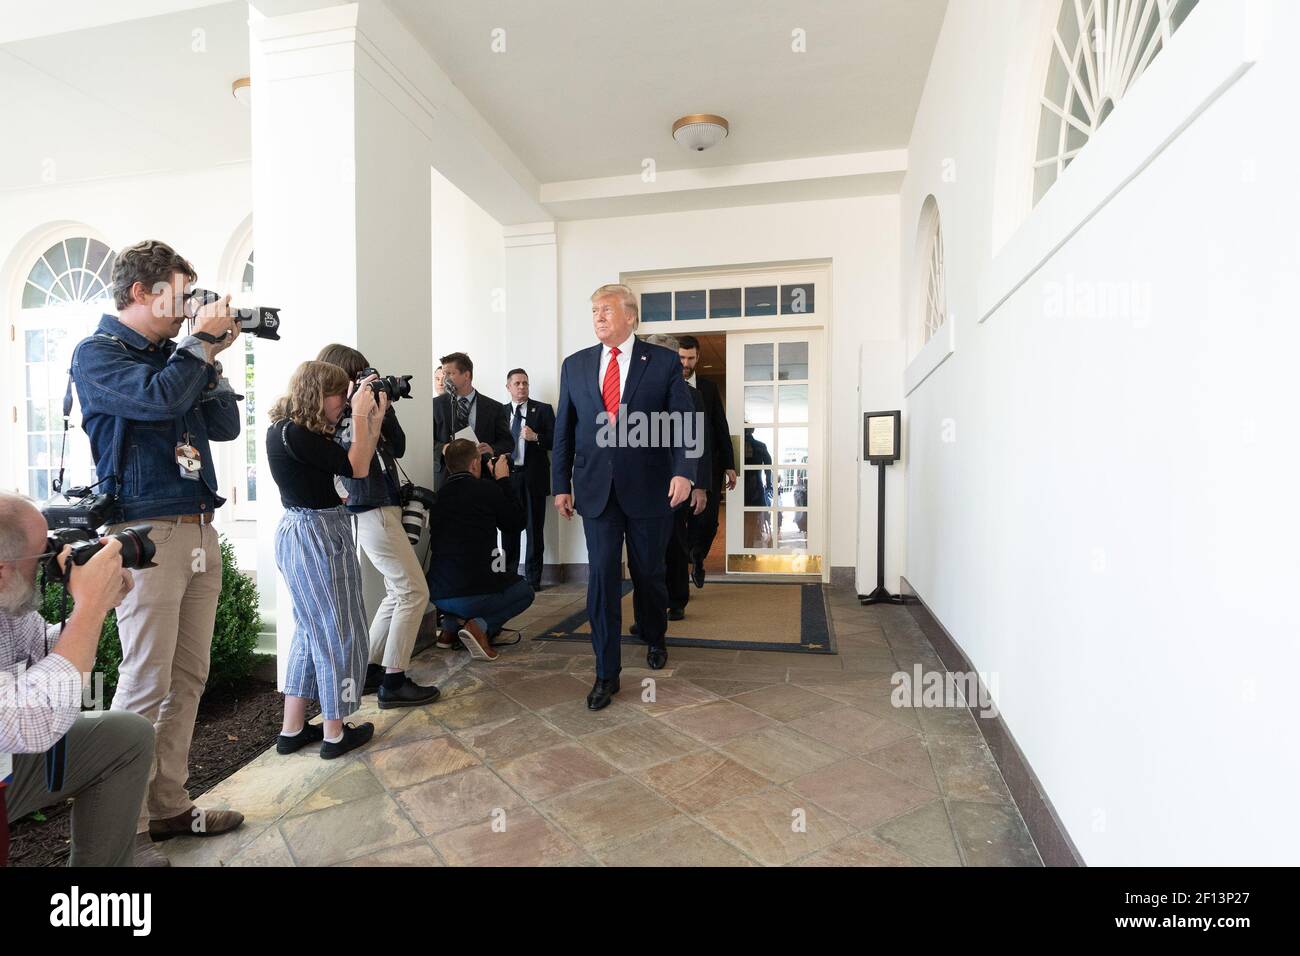 https://c8.alamy.com/comp/2F13P27/president-donald-trump-walks-along-the-west-wing-colonnade-on-his-way-to-celebrate-the-2019-stanley-cup-championship-team-the-st-louis-blues-tuesday-oct-15-2019-in-the-rose-garden-of-the-white-house-2F13P27.jpg